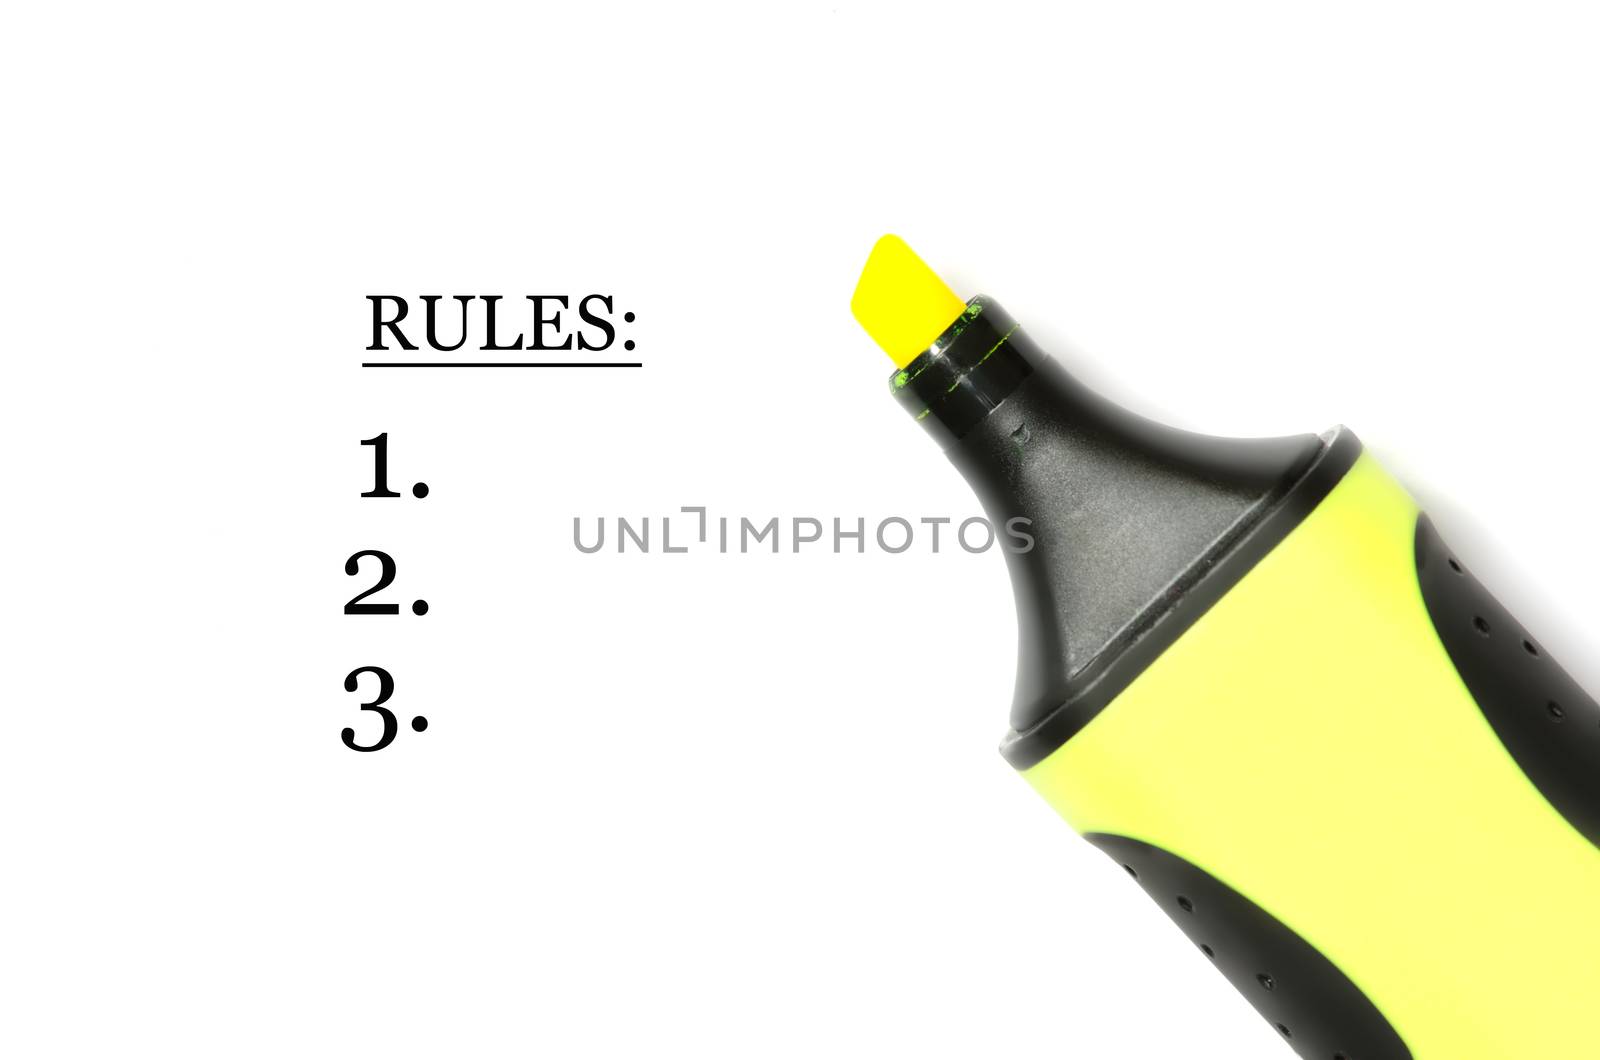 Rules list with three points and yellow marker.